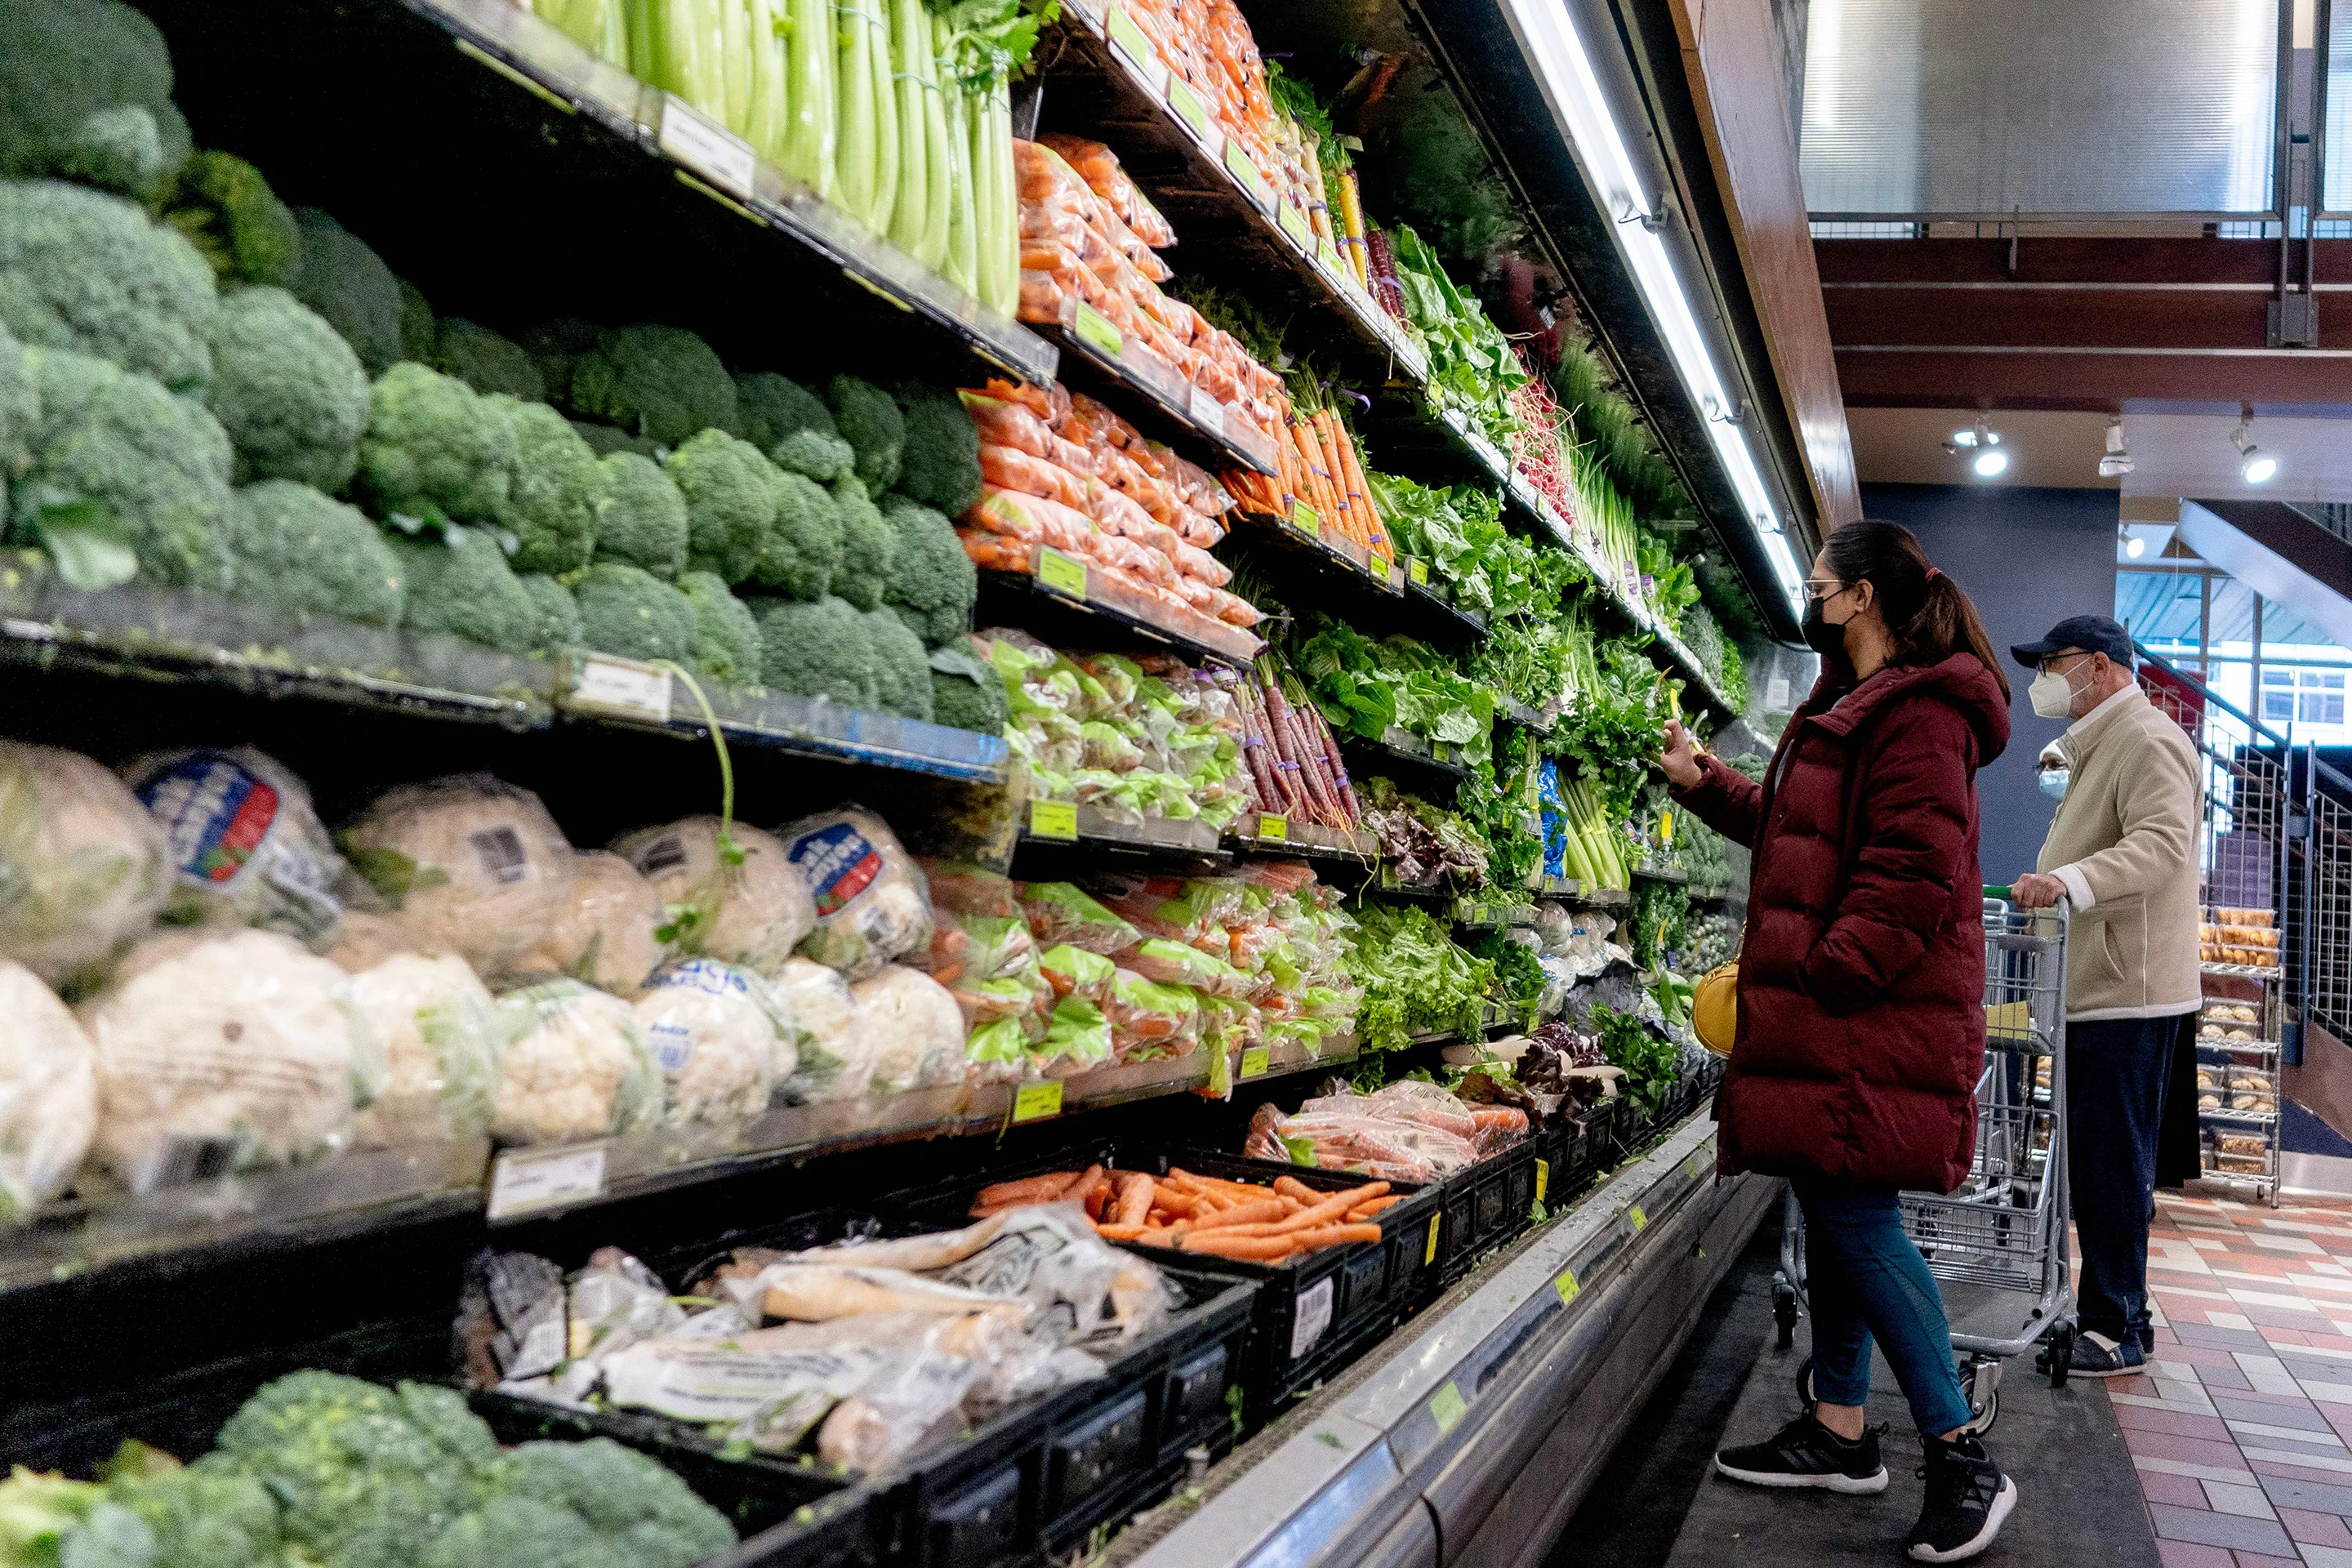 Inflation Is Hitting Groceries Hard, With Food Prices up Nearly 11% Since Last Year